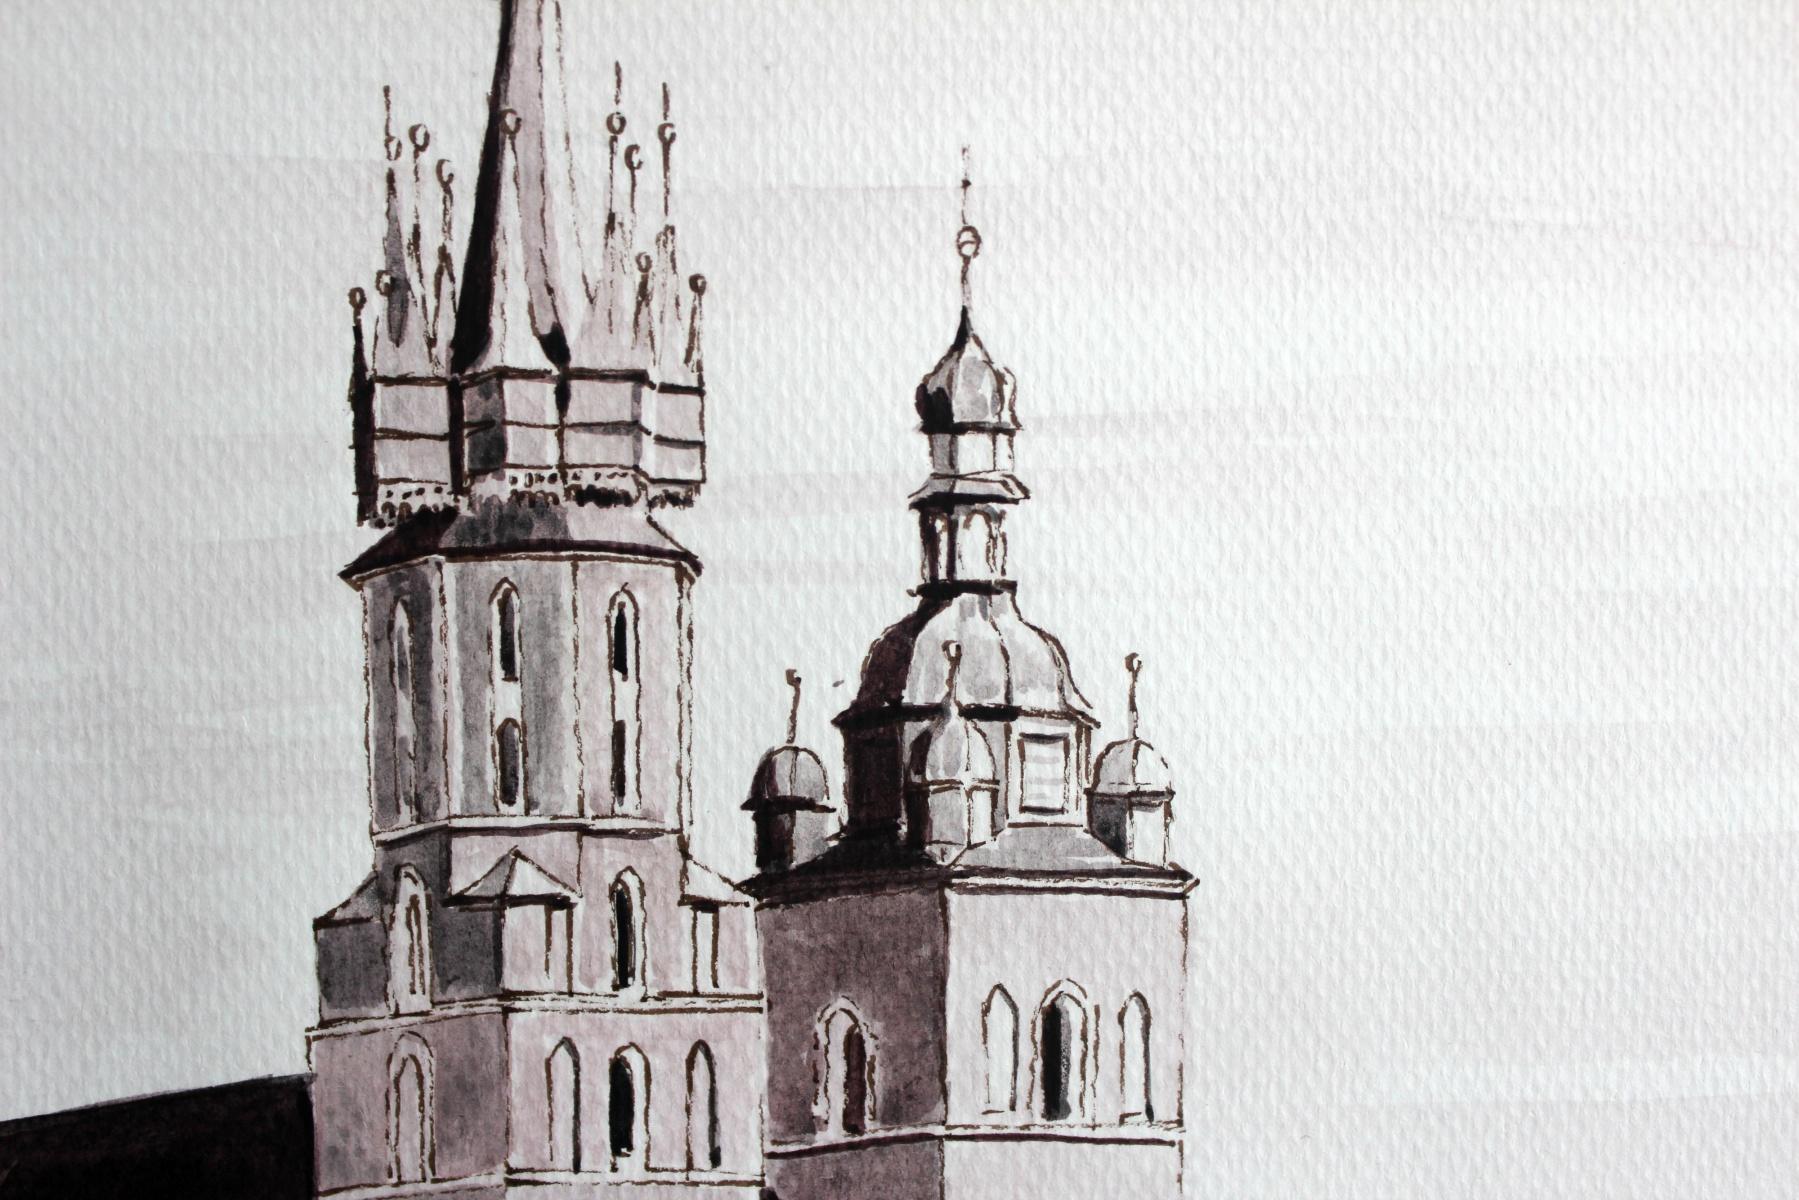 Cracow - Contemporary Landscape Watercolor & Ink Painting, Architecture - Realist Art by Mariusz Szałajdewicz